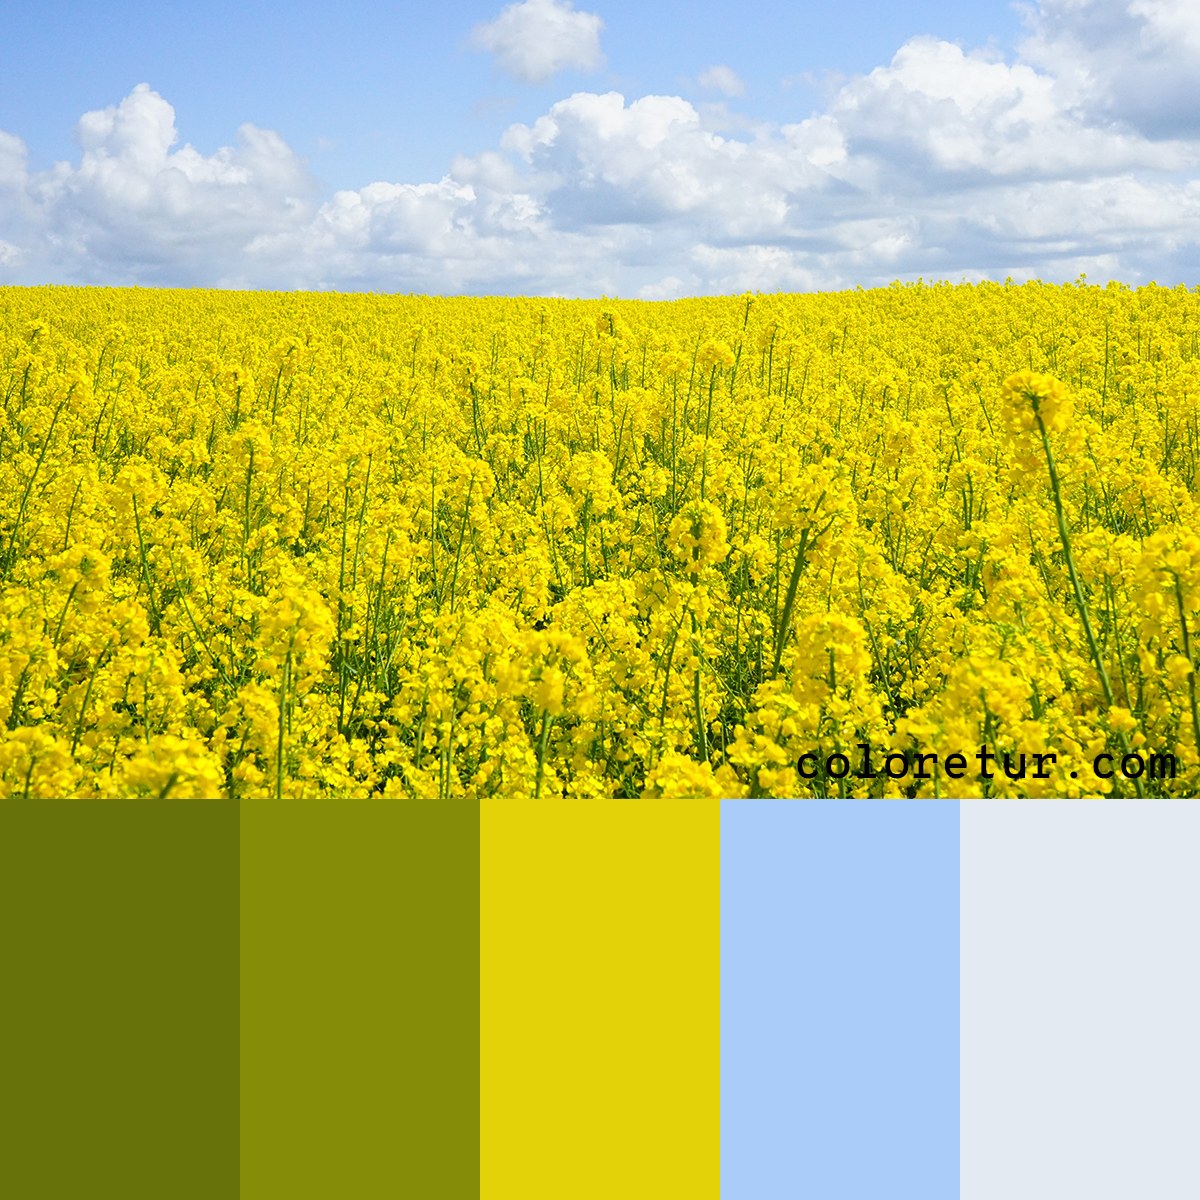 Green and yellow swatches pulled from flowering canola fields